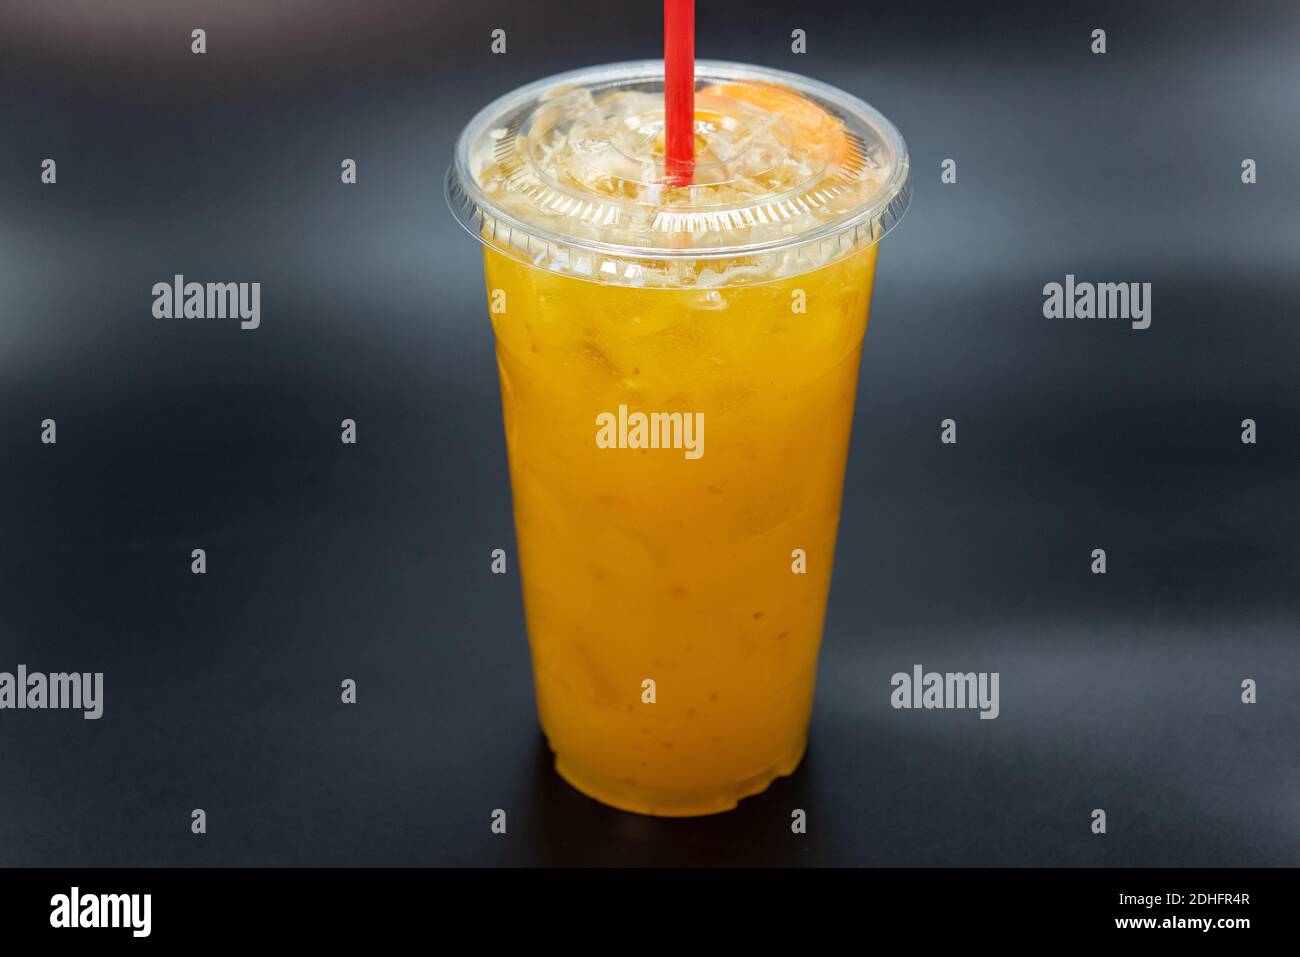 Orange Mexican Mango and Pinneapple fruit drink beverage will quench that thrist with sweet flavors. Stock Photo